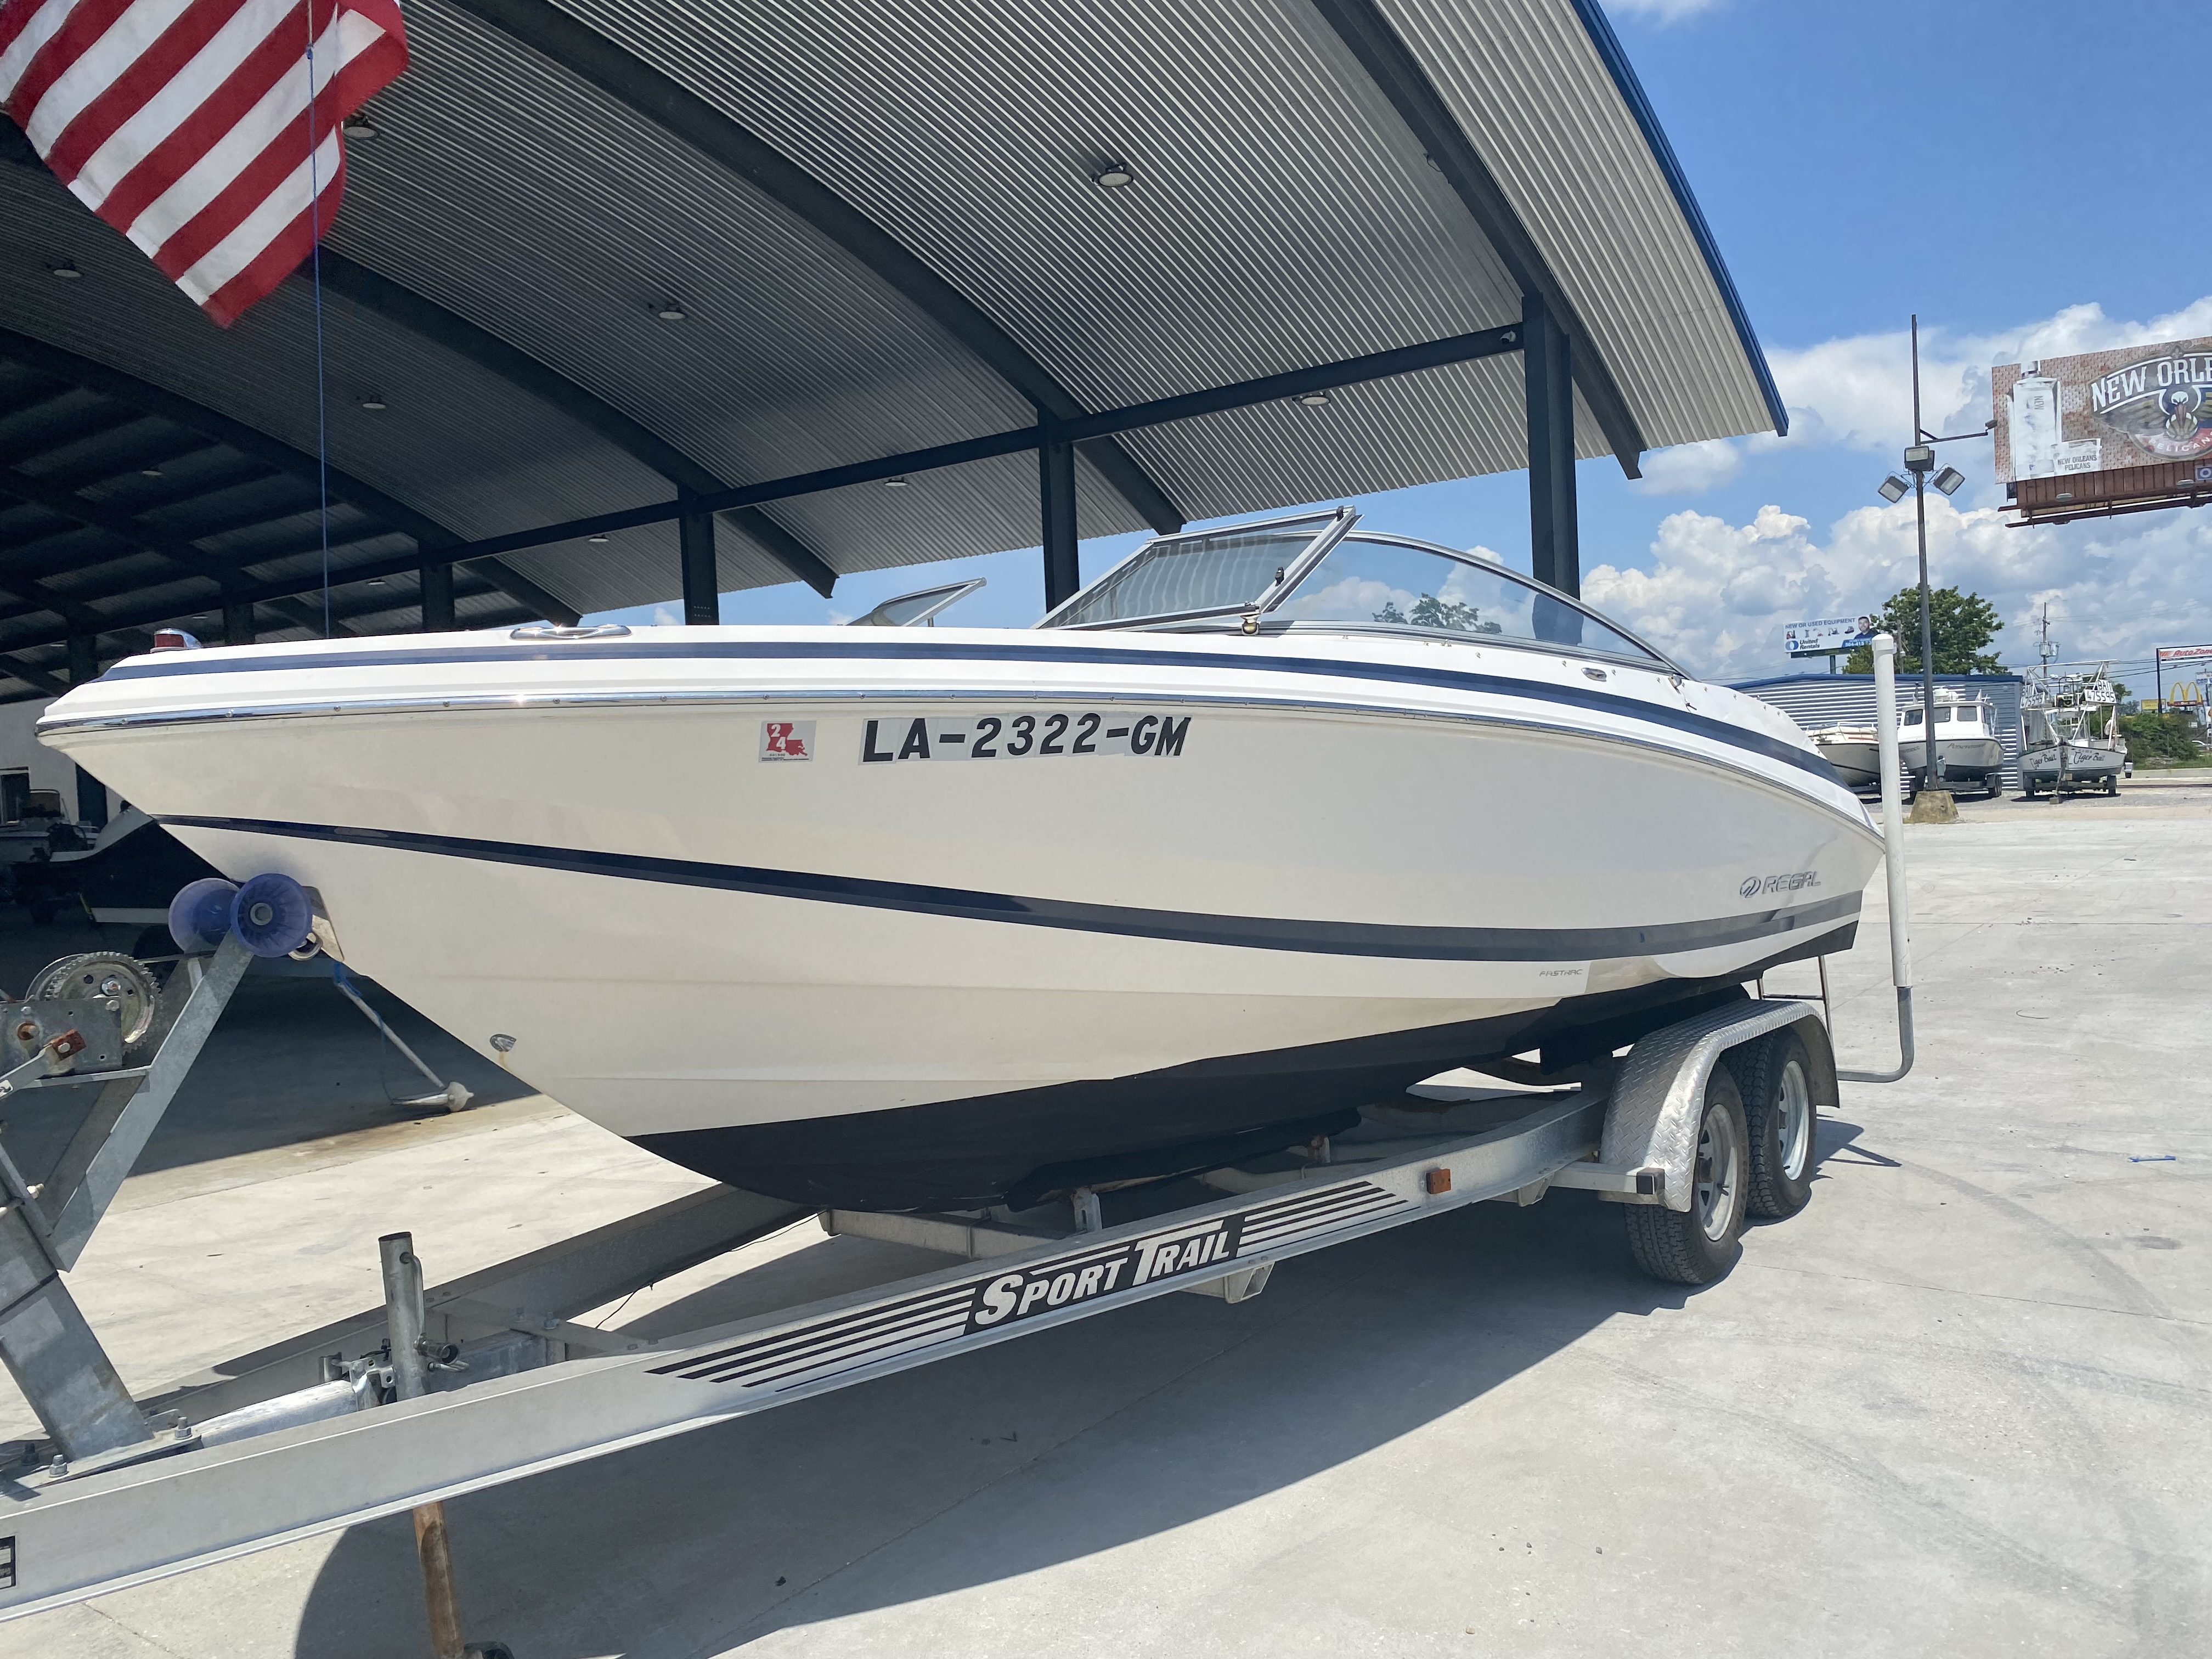 2007 Regal boat for sale, model of the boat is Sport Boat 2000 Bowrider & Image # 3 of 11